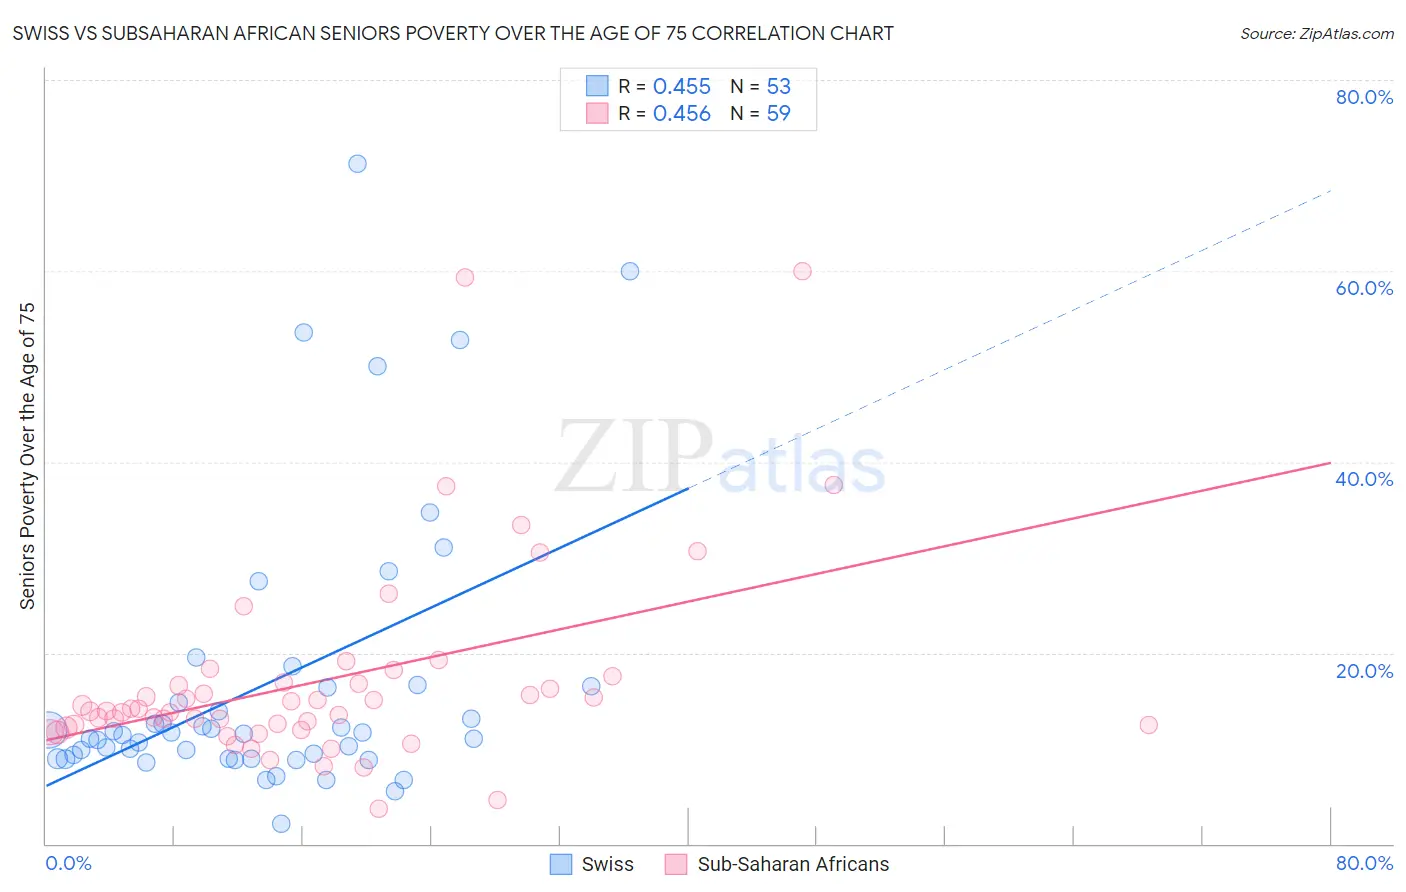 Swiss vs Subsaharan African Seniors Poverty Over the Age of 75